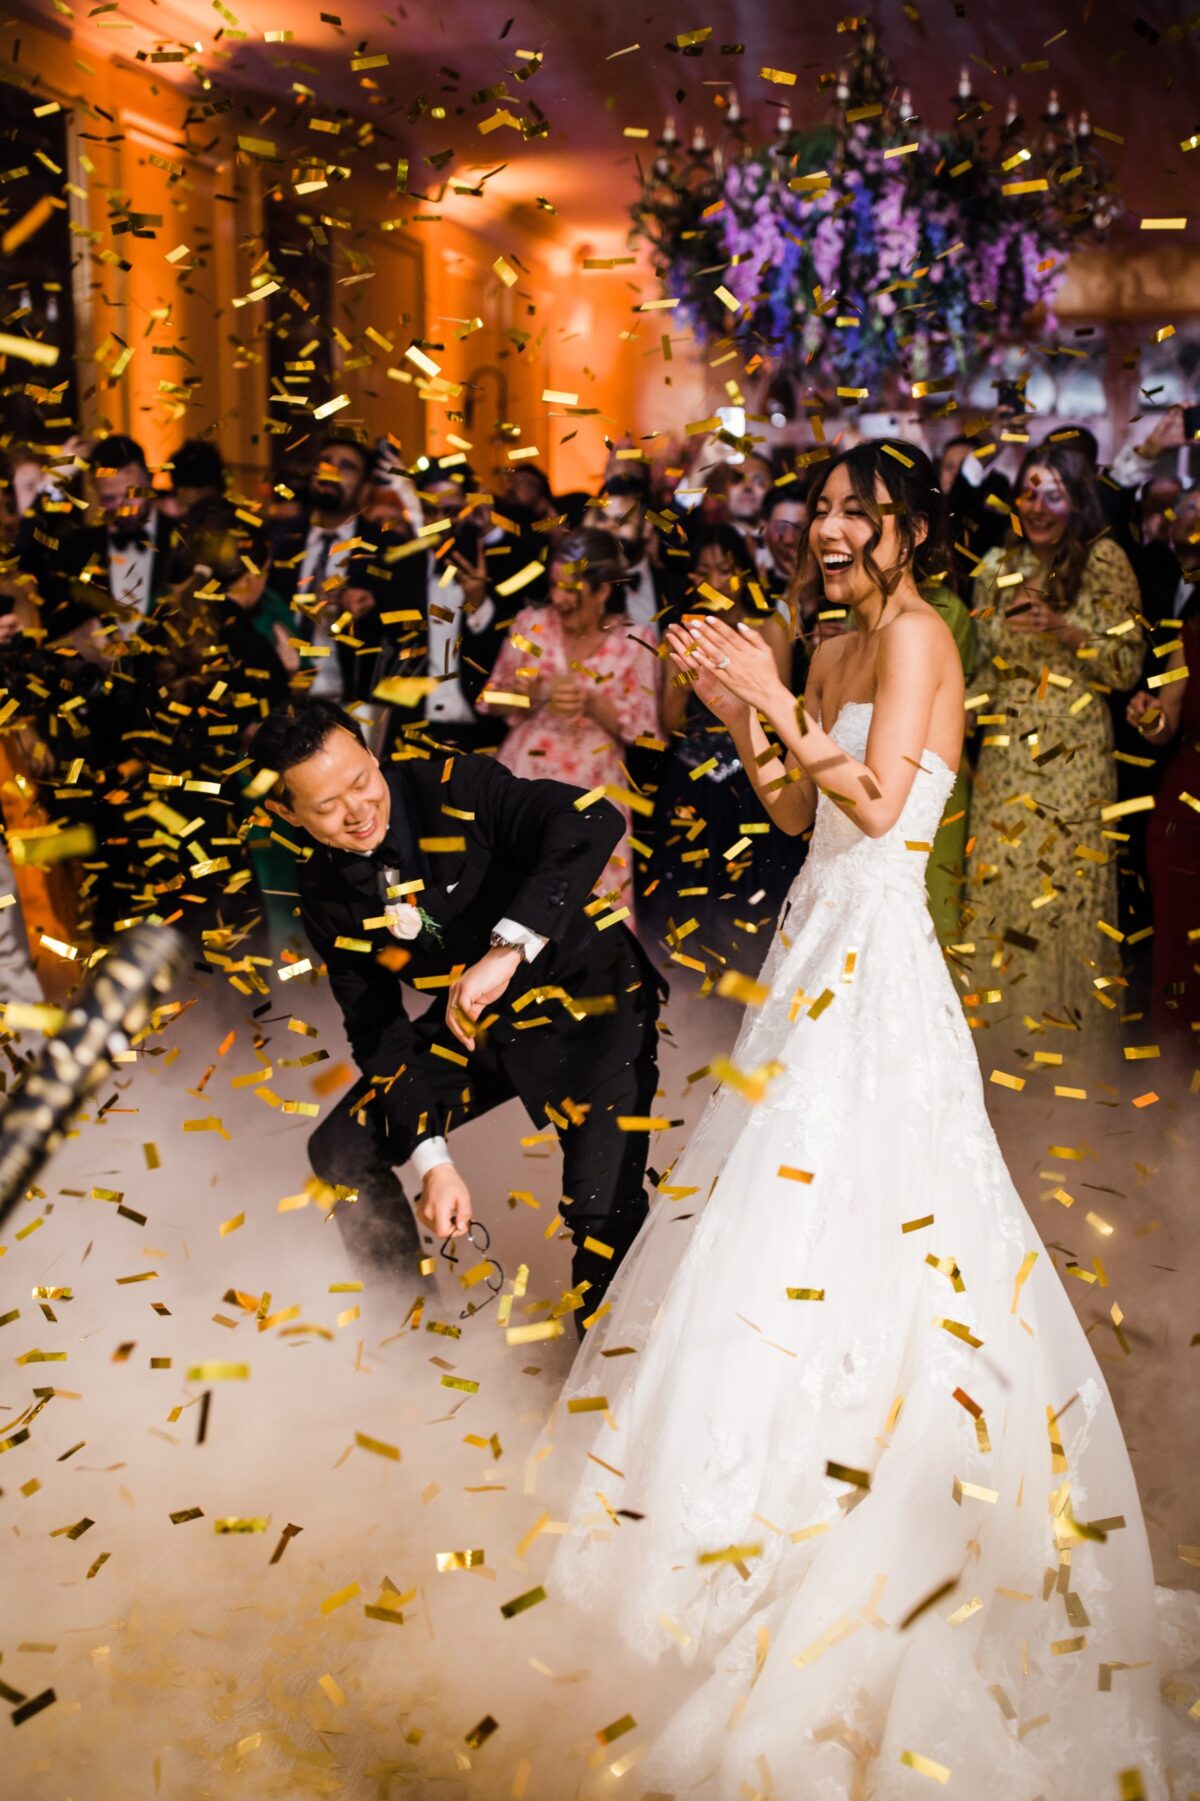 confetti cannons over bride and grooms first dance with low fog - wedding designer